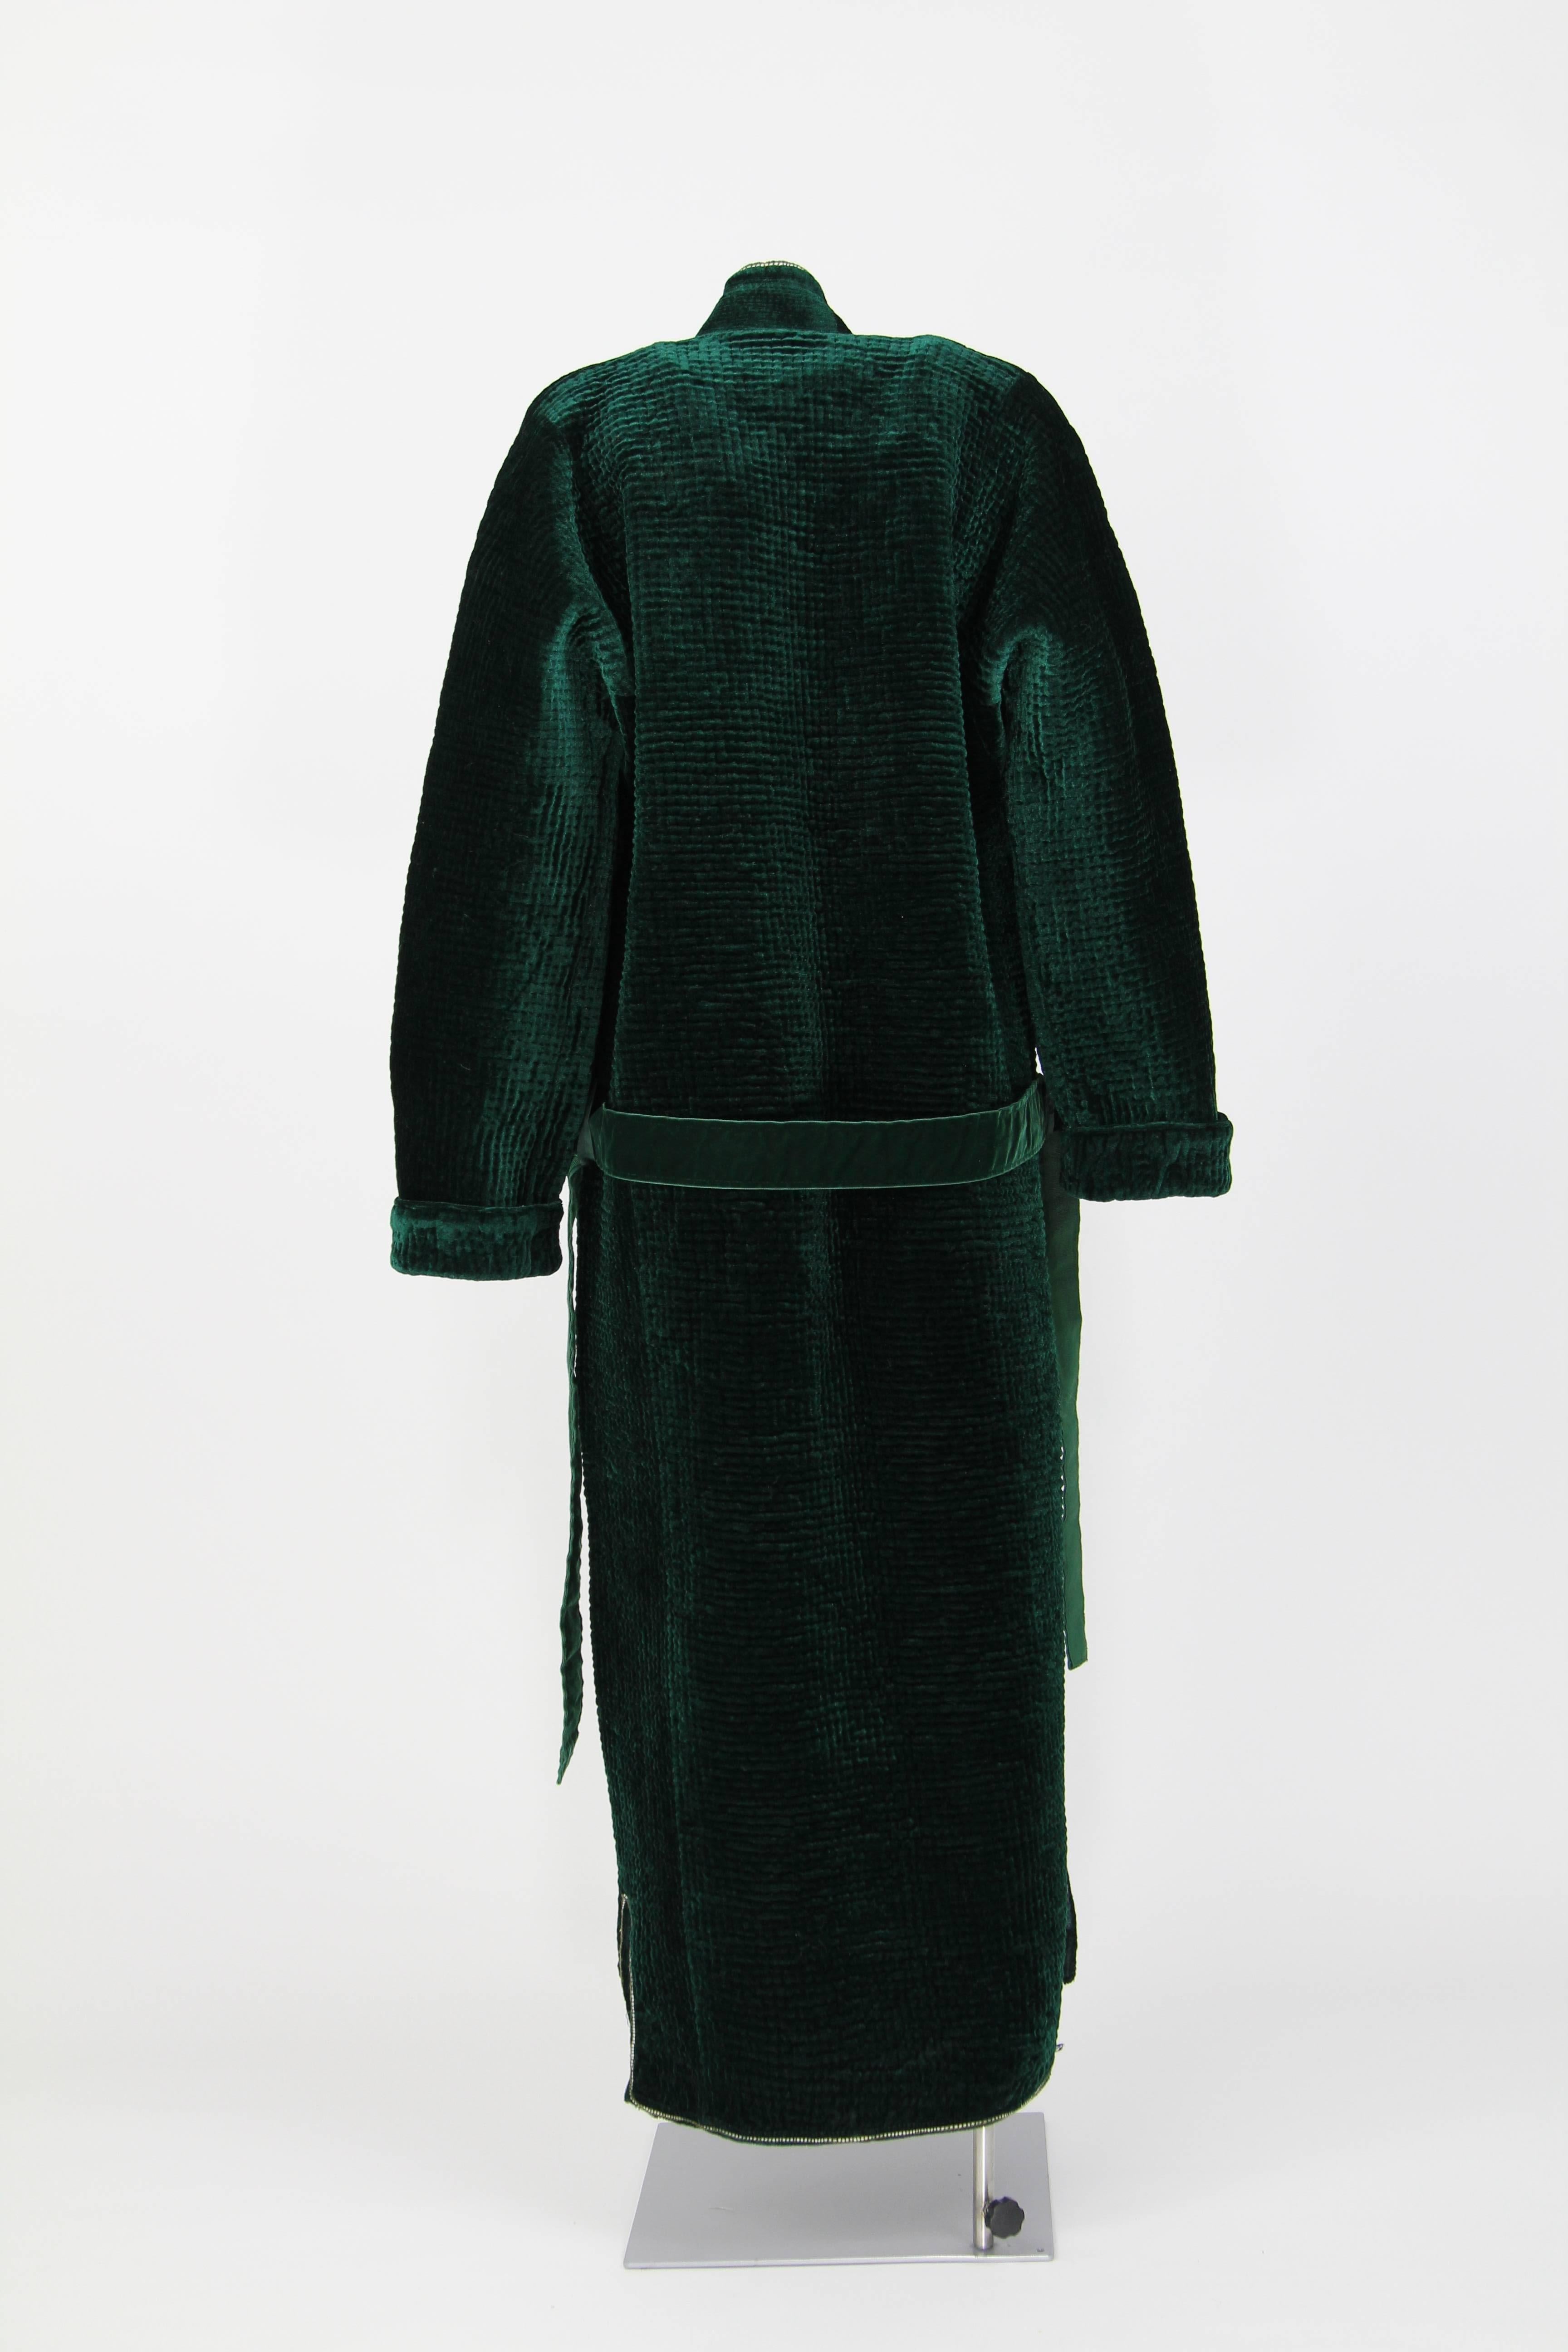 Beautiful green velvet caftan from Uzbekistan, featuring a belt. 
It is handmade and in excellent conditions.
From 1970s.
Size L/XL.


Measurements: shoulders: 42 cm, sleeve: 69 cm.